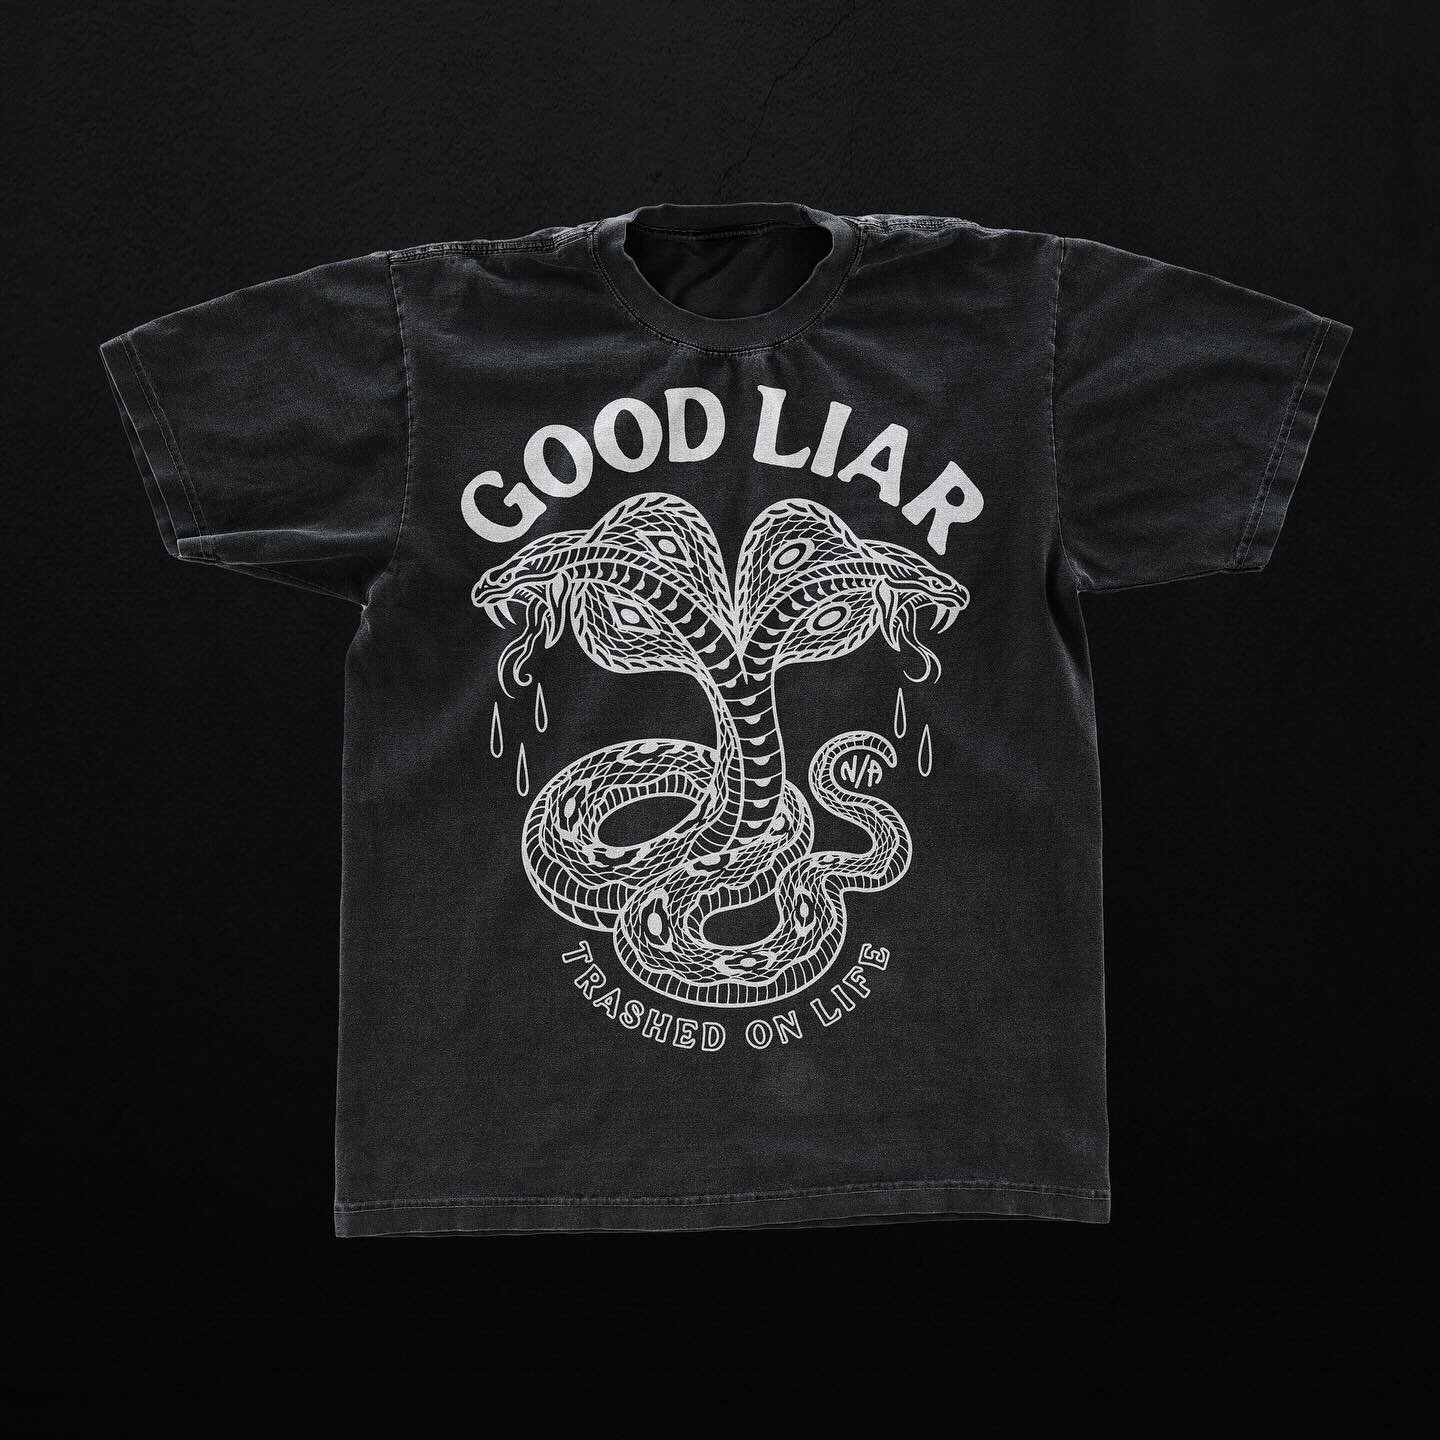 Official Good Liar merch dropping soon. Being bad never looked so good. 
.
#Merch #DroppingSoon #NonAlcoholic #DrinkReckless #StayReckless #GoodLiar #DrinkGoodLiar #NonAlcoholicBeer #Beer #NABeer #NA #MidwestIPA